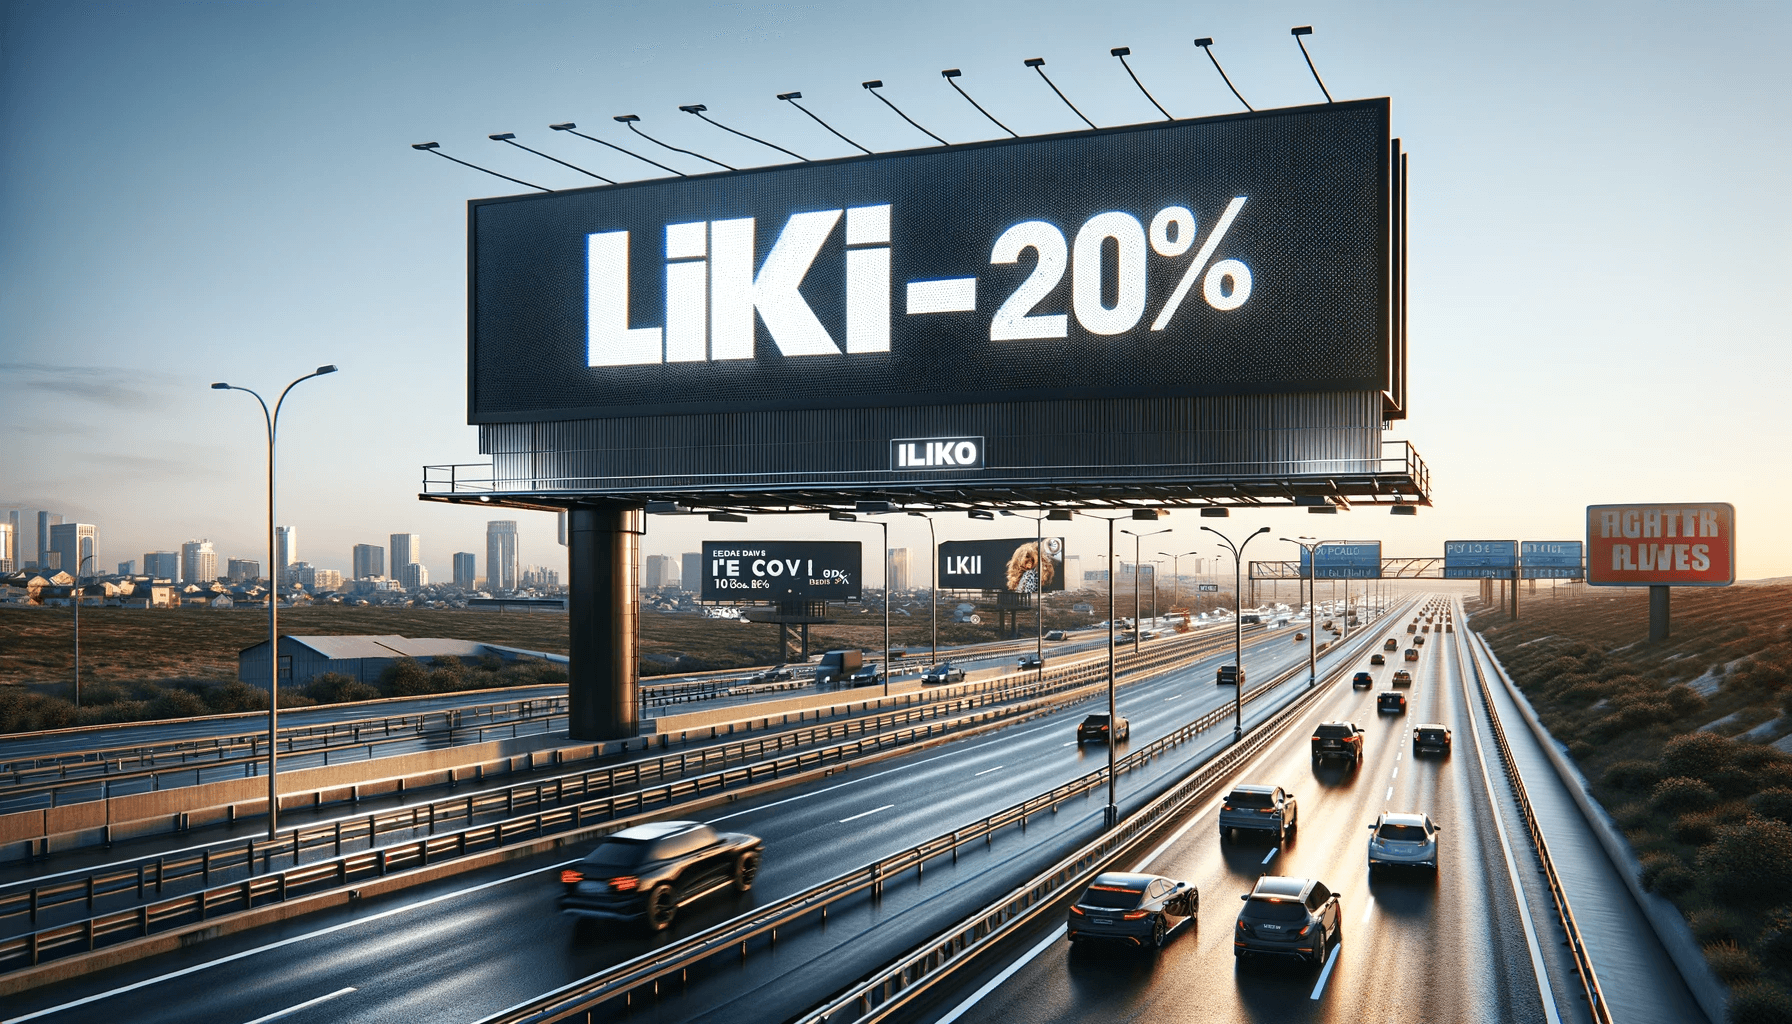 DALL·E 2023-11-17 11.12.43 - A photorealistic billboard on a busy modern highway in the United States, prominently displaying an advertisement for 'LIKI -20%'. The billboard shoul.png